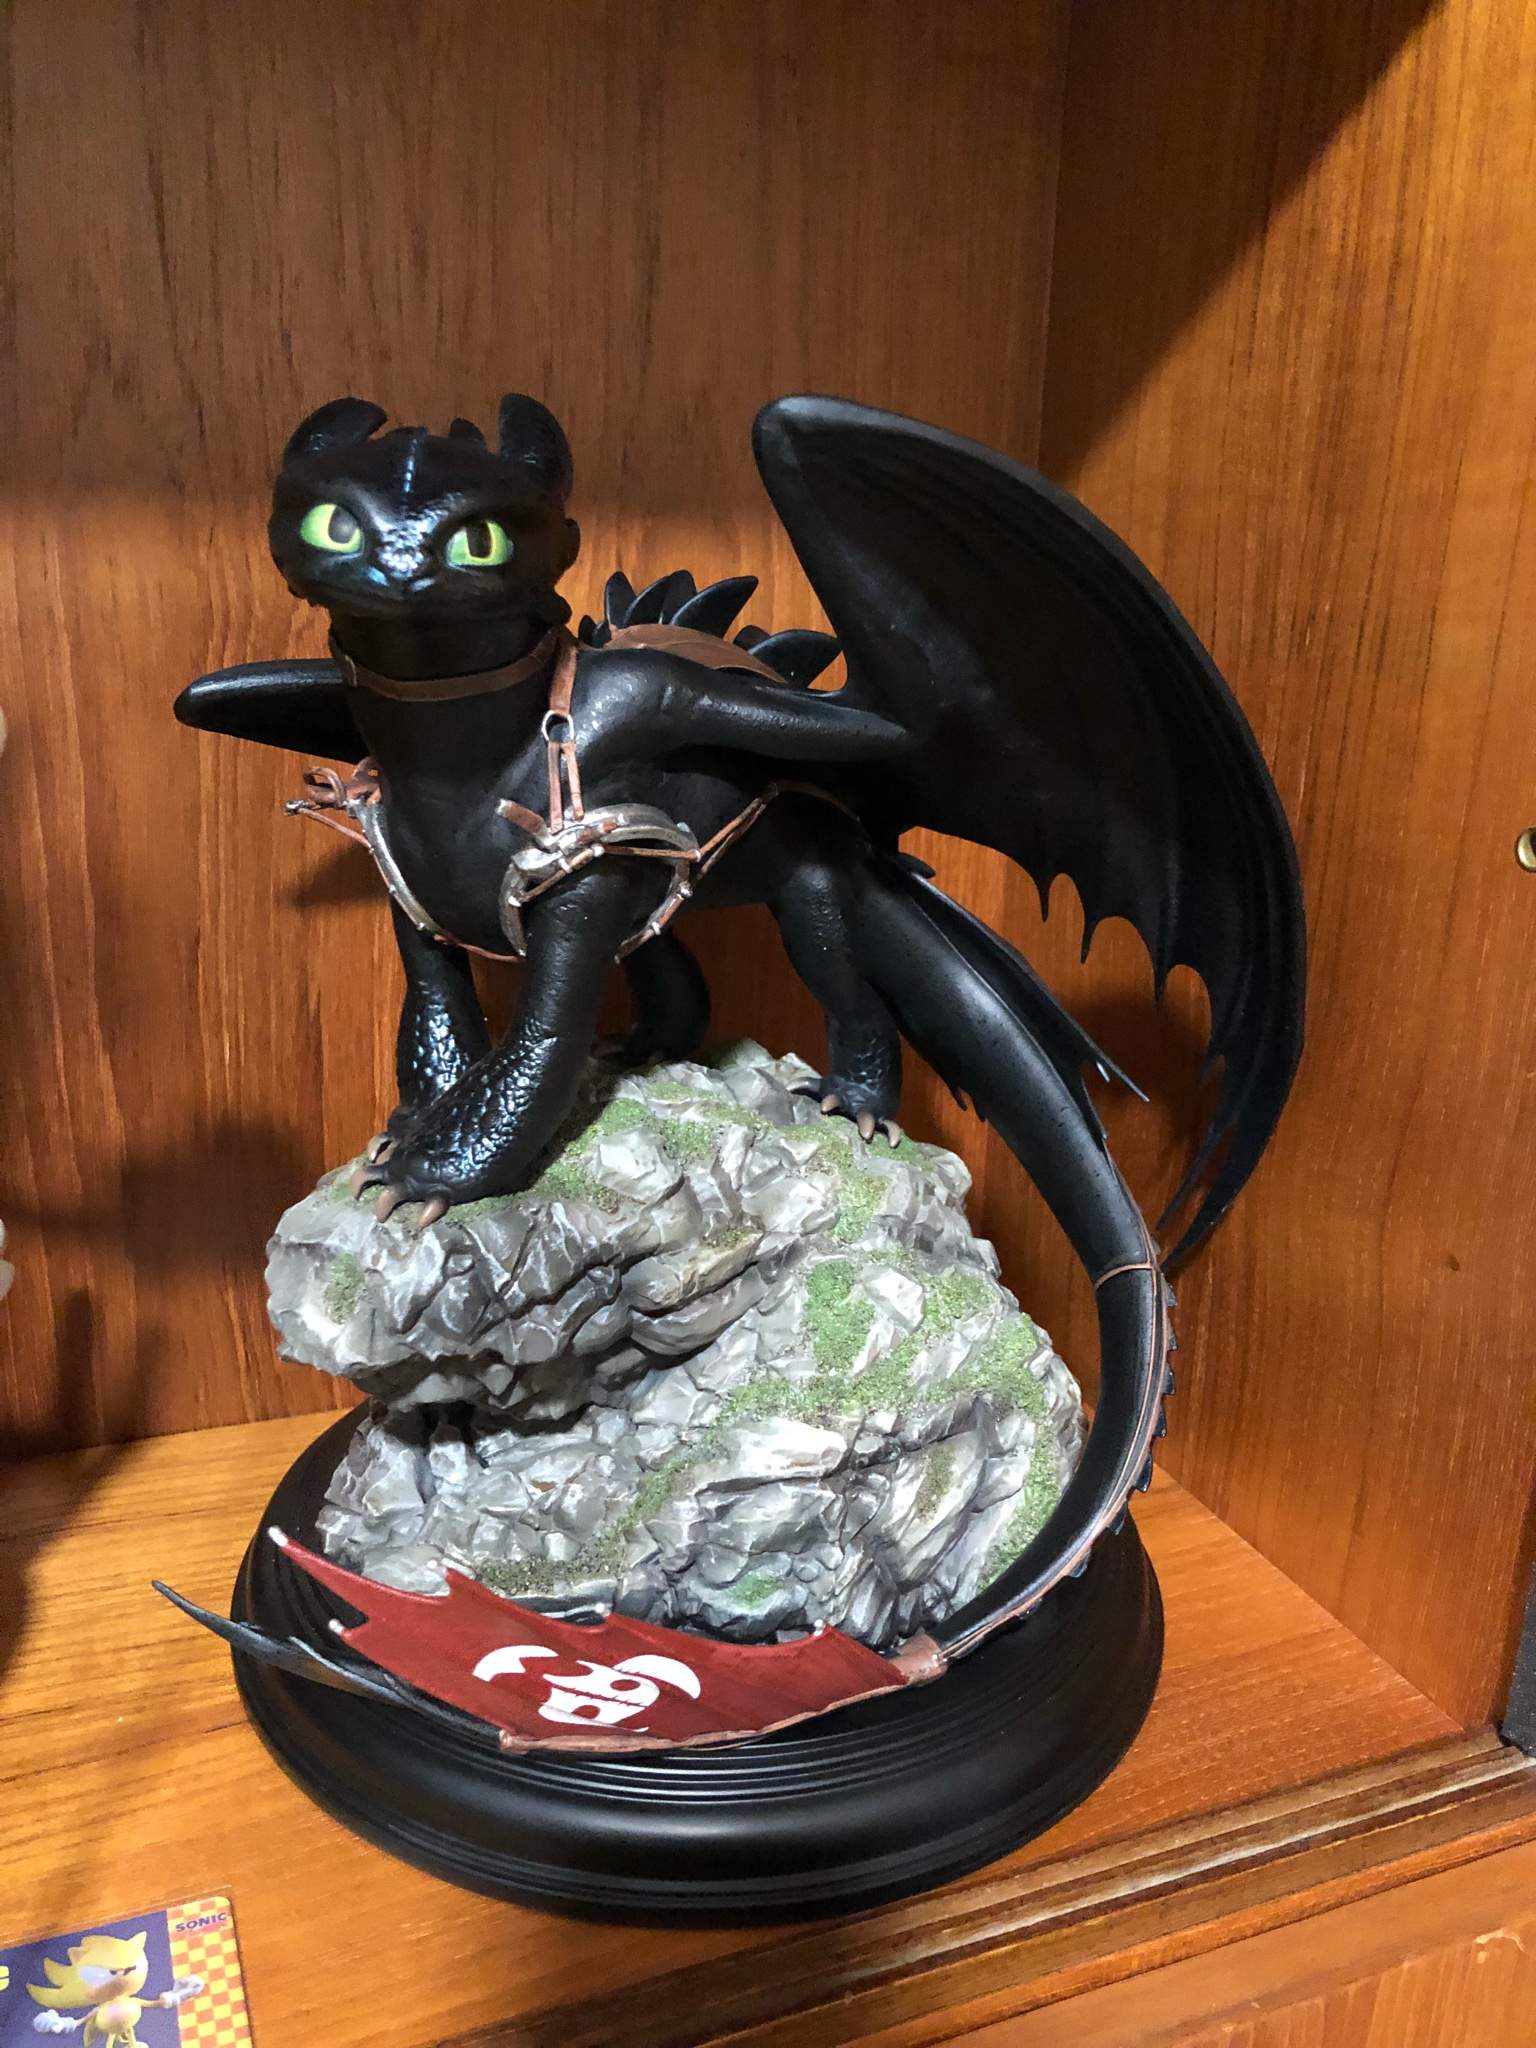 sideshow toothless statue for sale